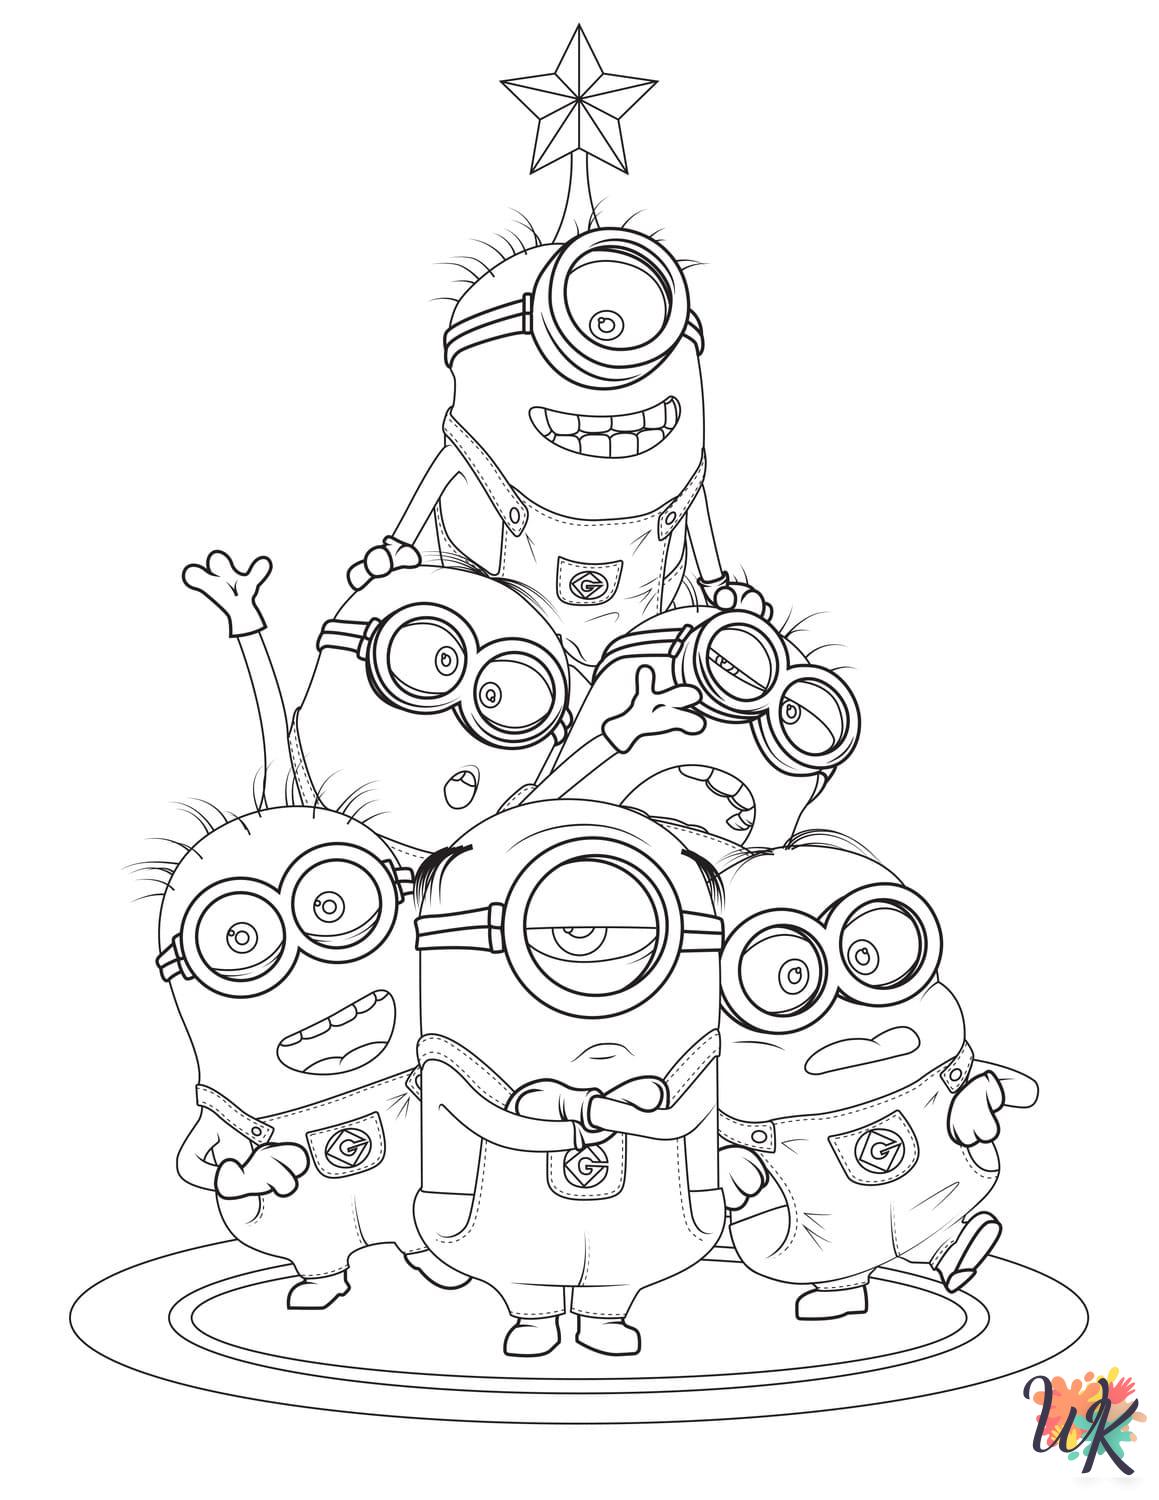 Minion Christmas themed coloring pages